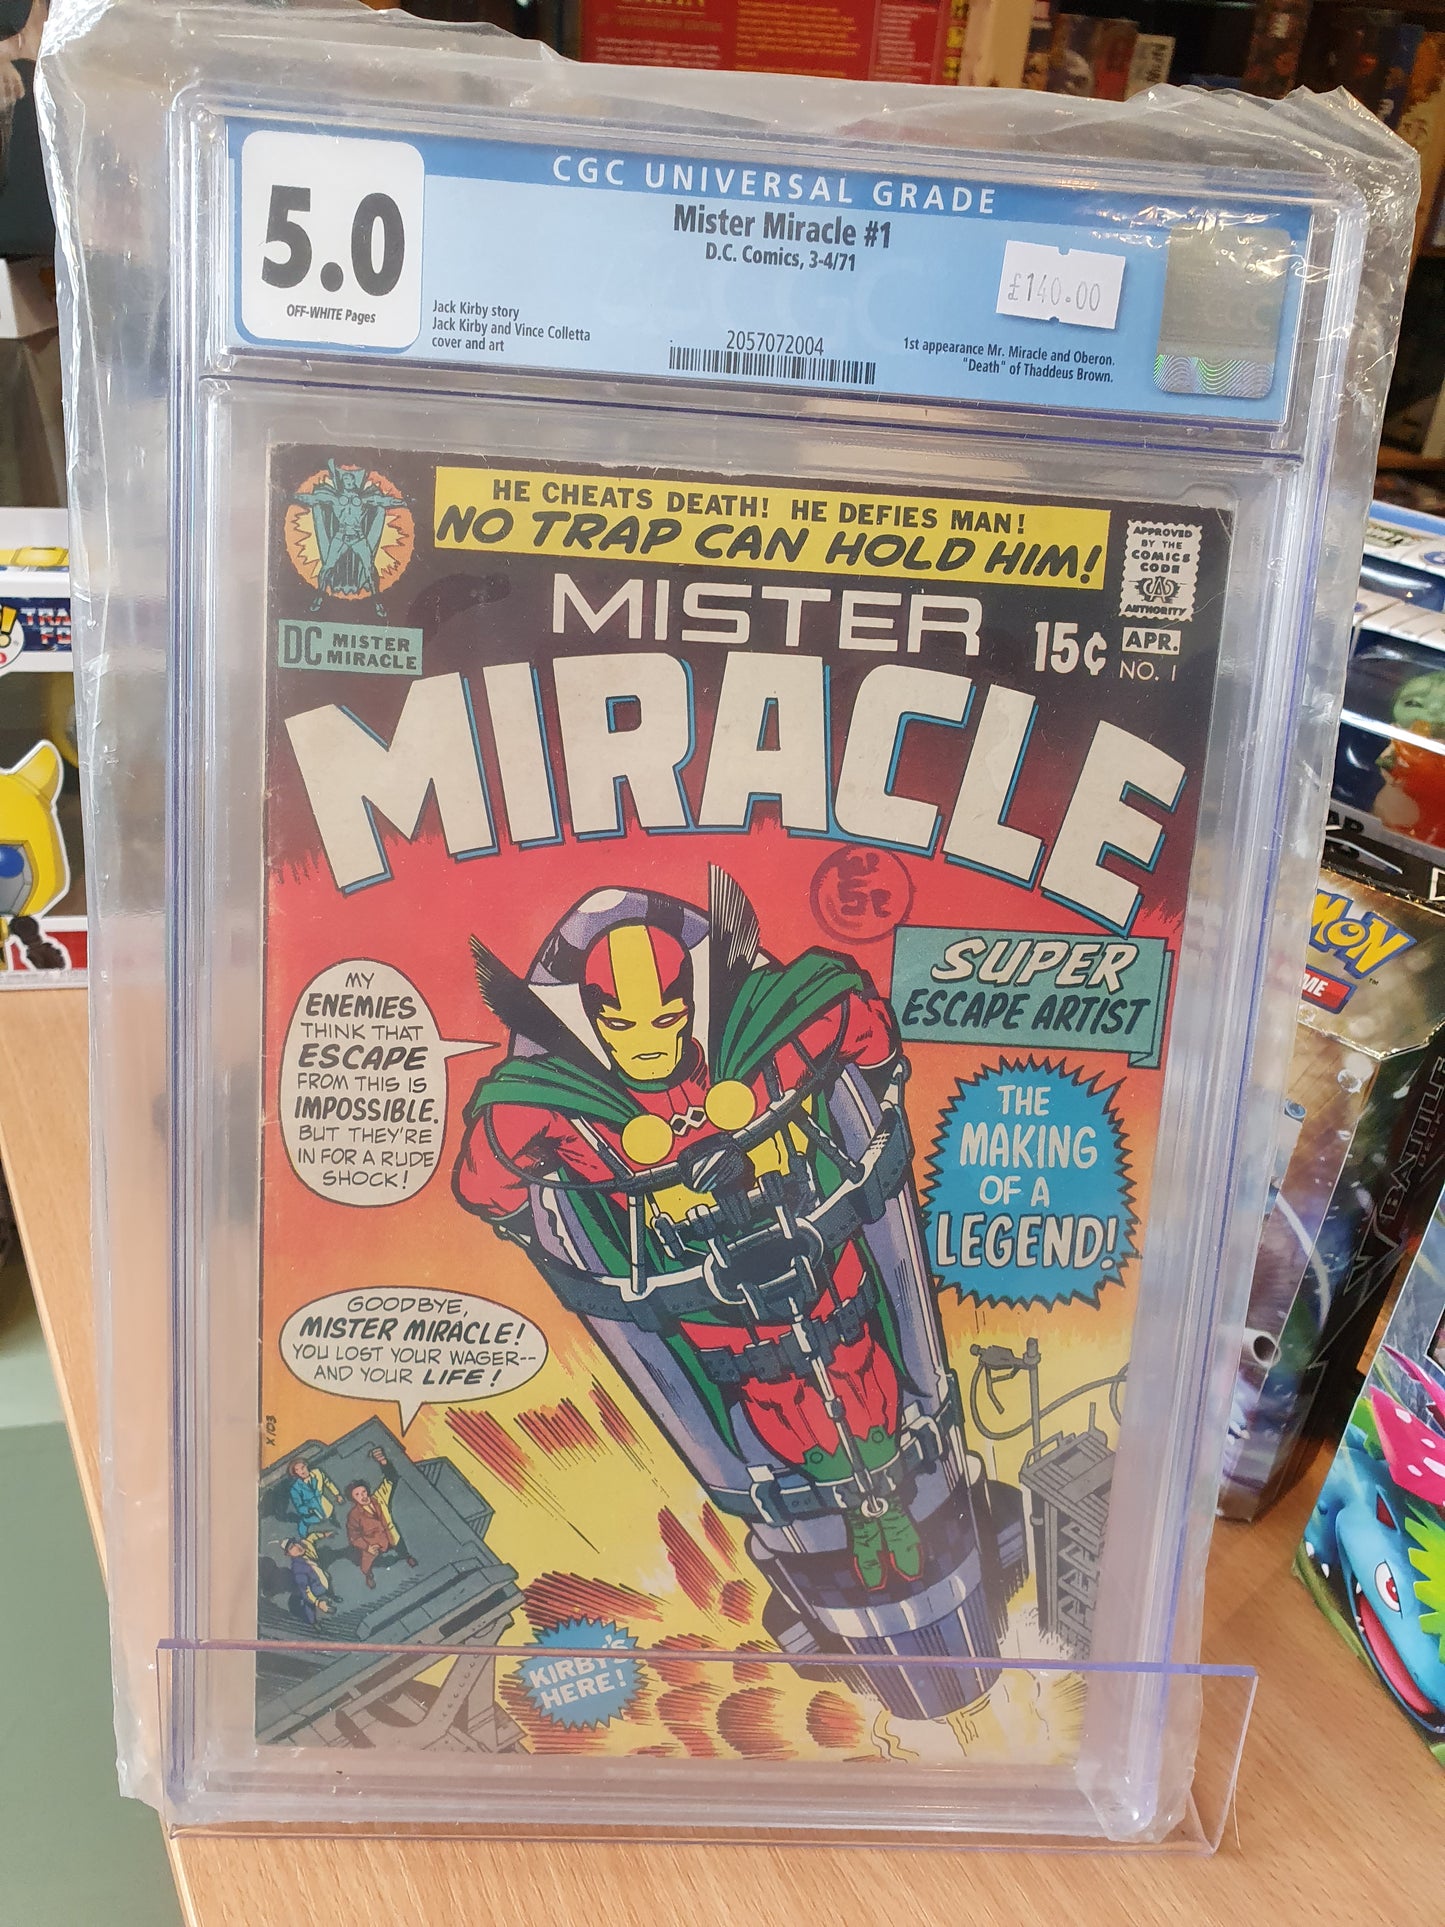 Mister Miracle #1 - CGC Graded 5.0 - 1st appearance Mr. Miracle and Oberon.